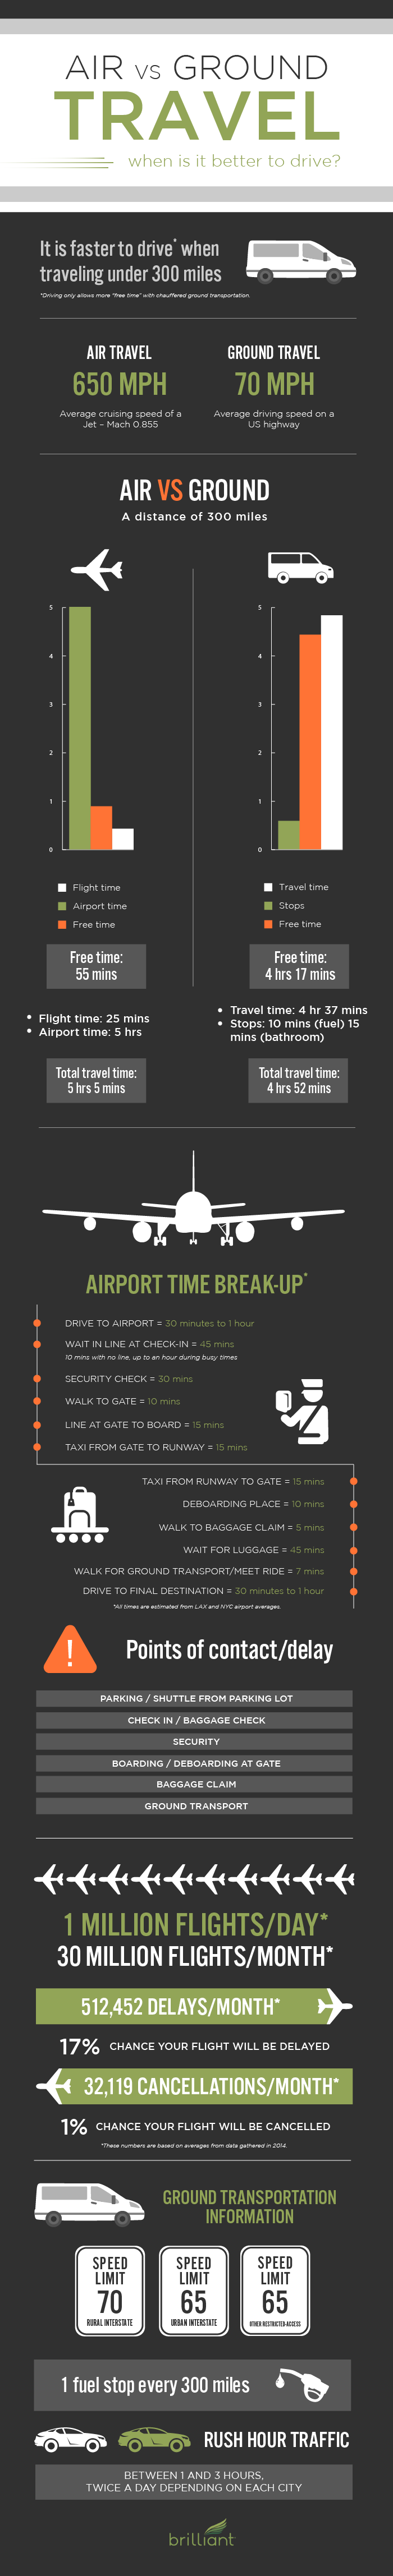 Driving vs Flying [INFOGRAPHIC]